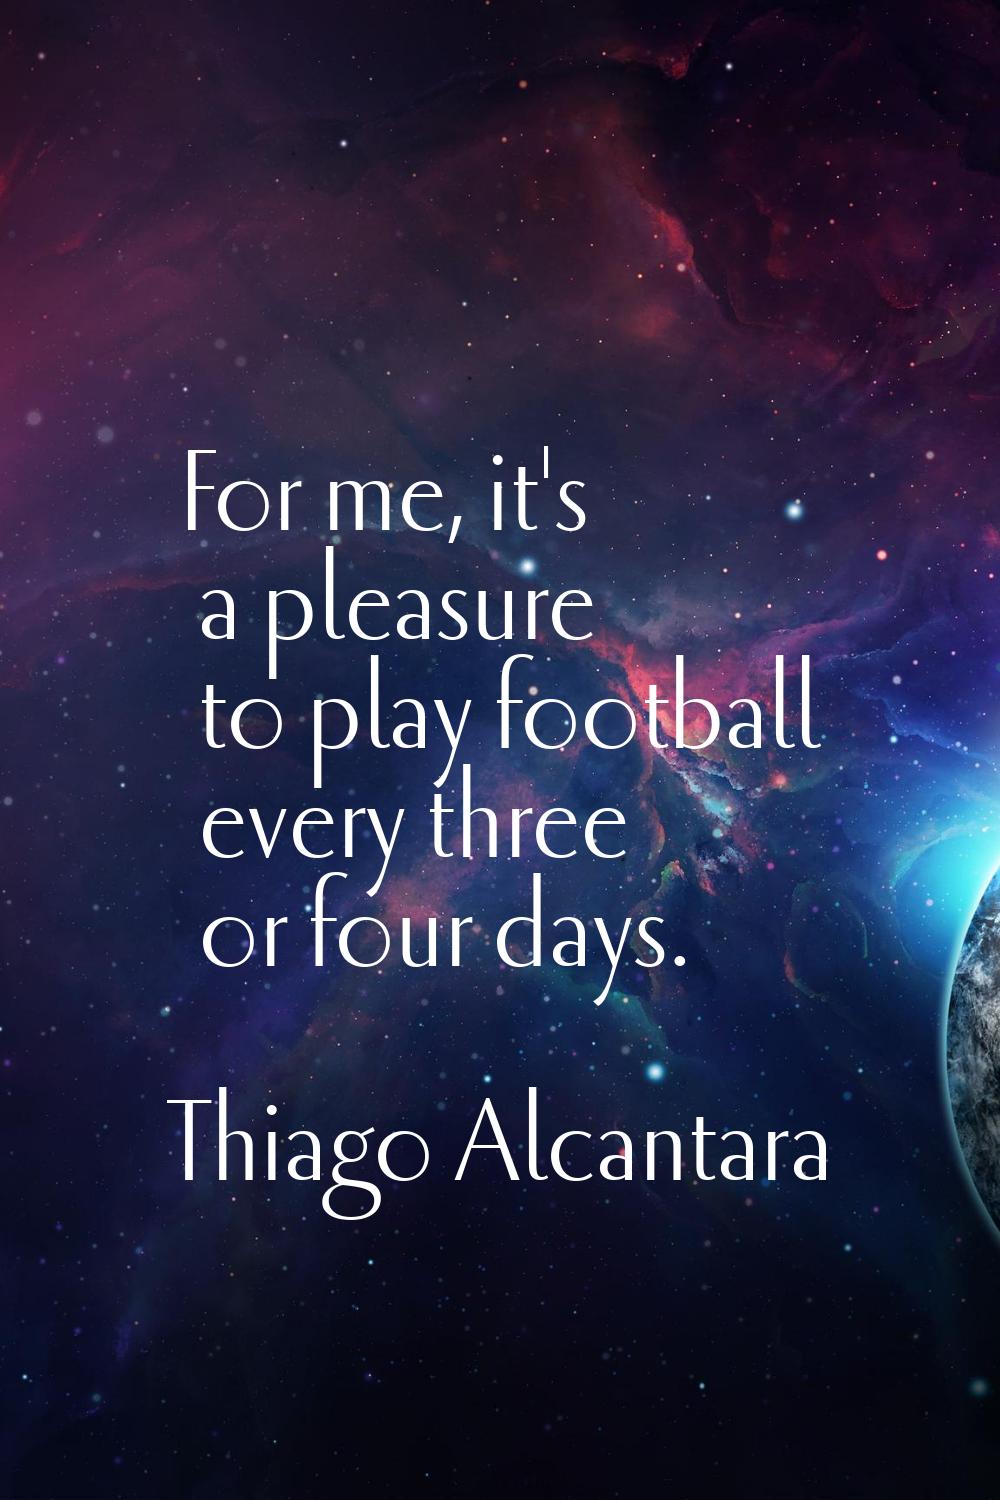 For me, it's a pleasure to play football every three or four days.